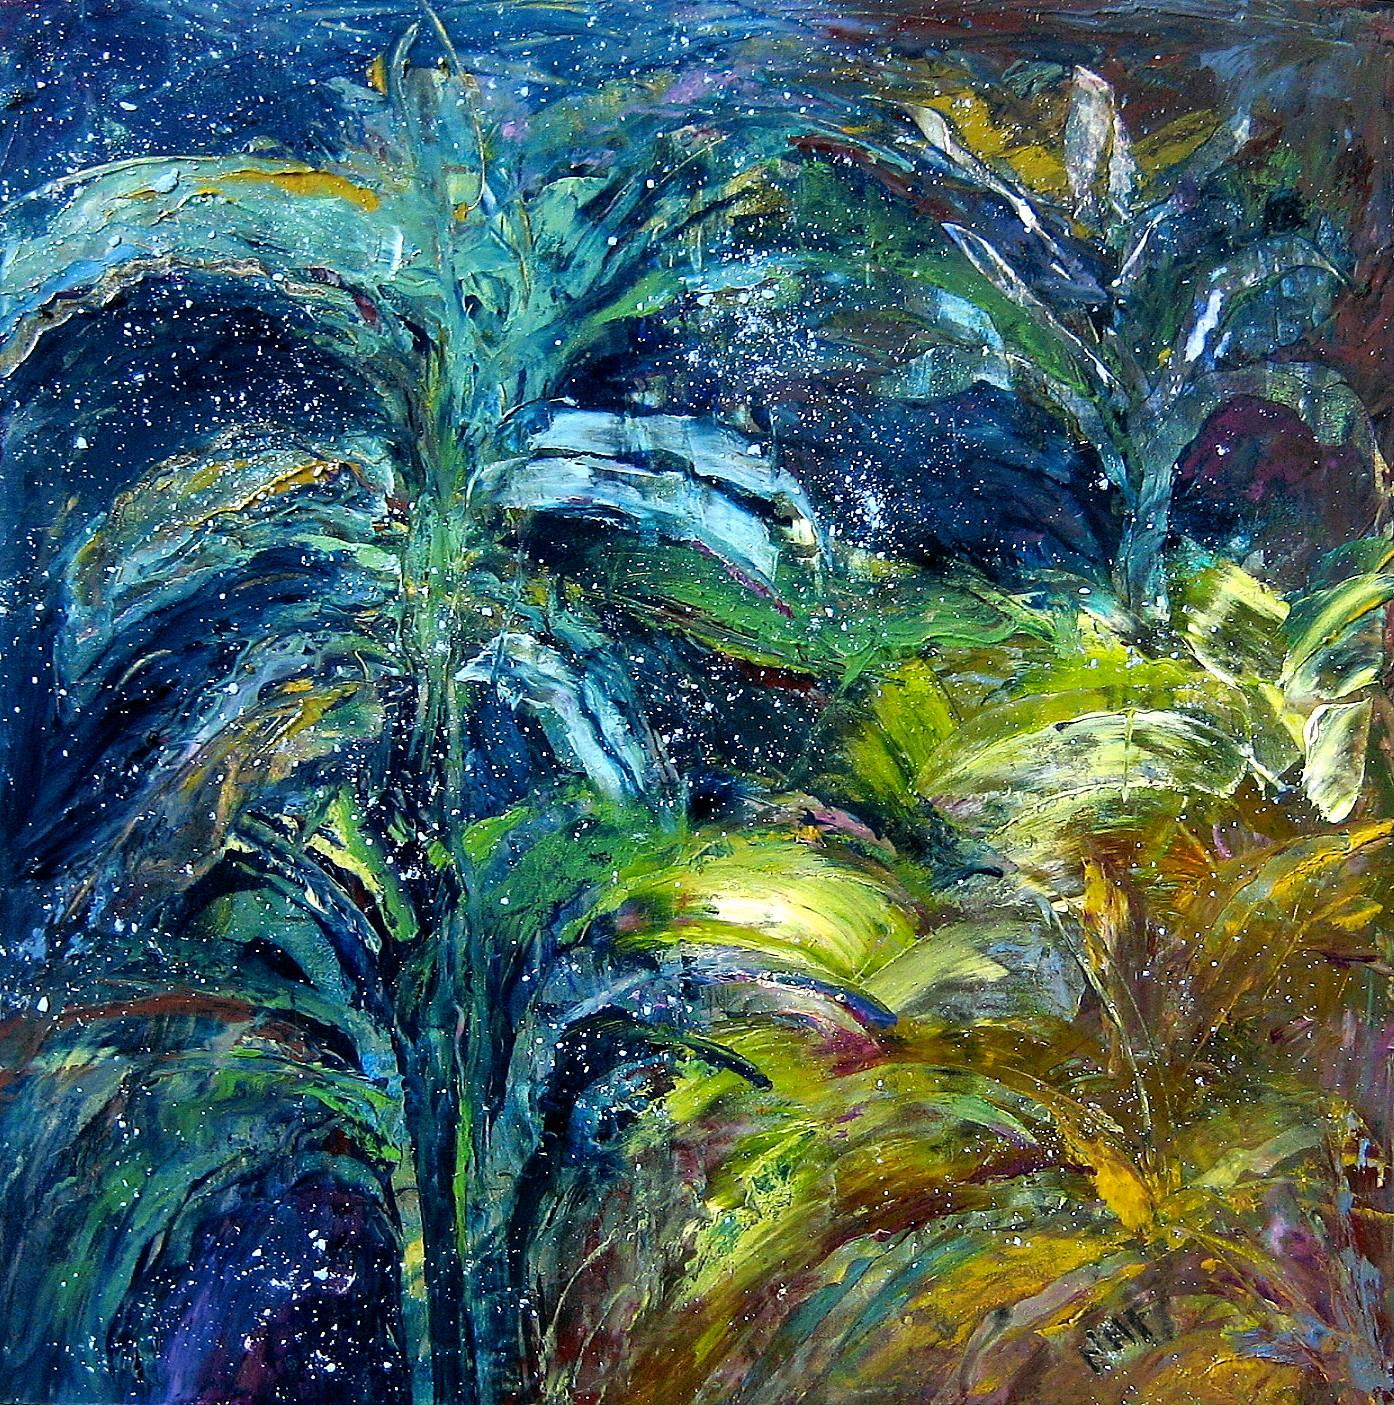 "Stars Above the Garden", expressionist, blues, greens, yellows, oil painting - Painting by Nan Hass Feldman